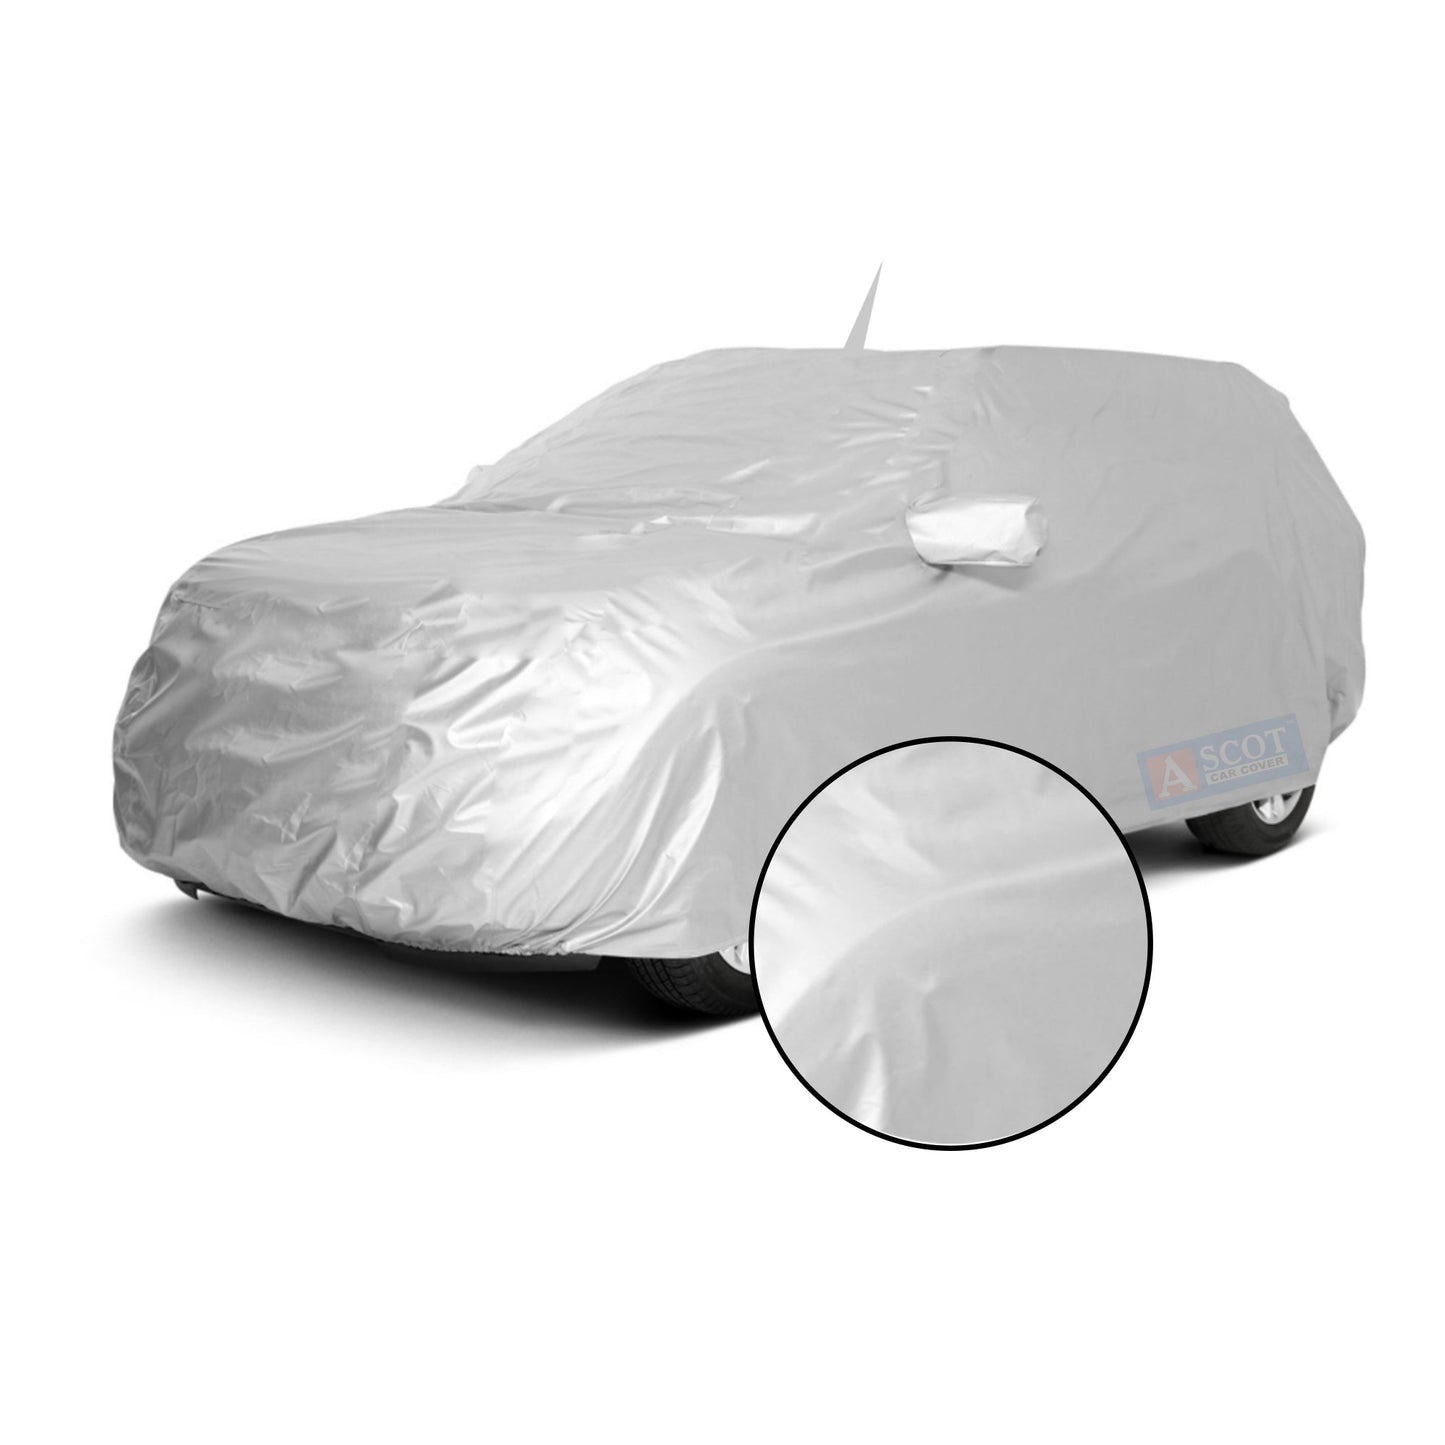 Ascot BMW 3 Series 2011-2018 Model Car Body Cover Dust Proof, Trippel Stitched